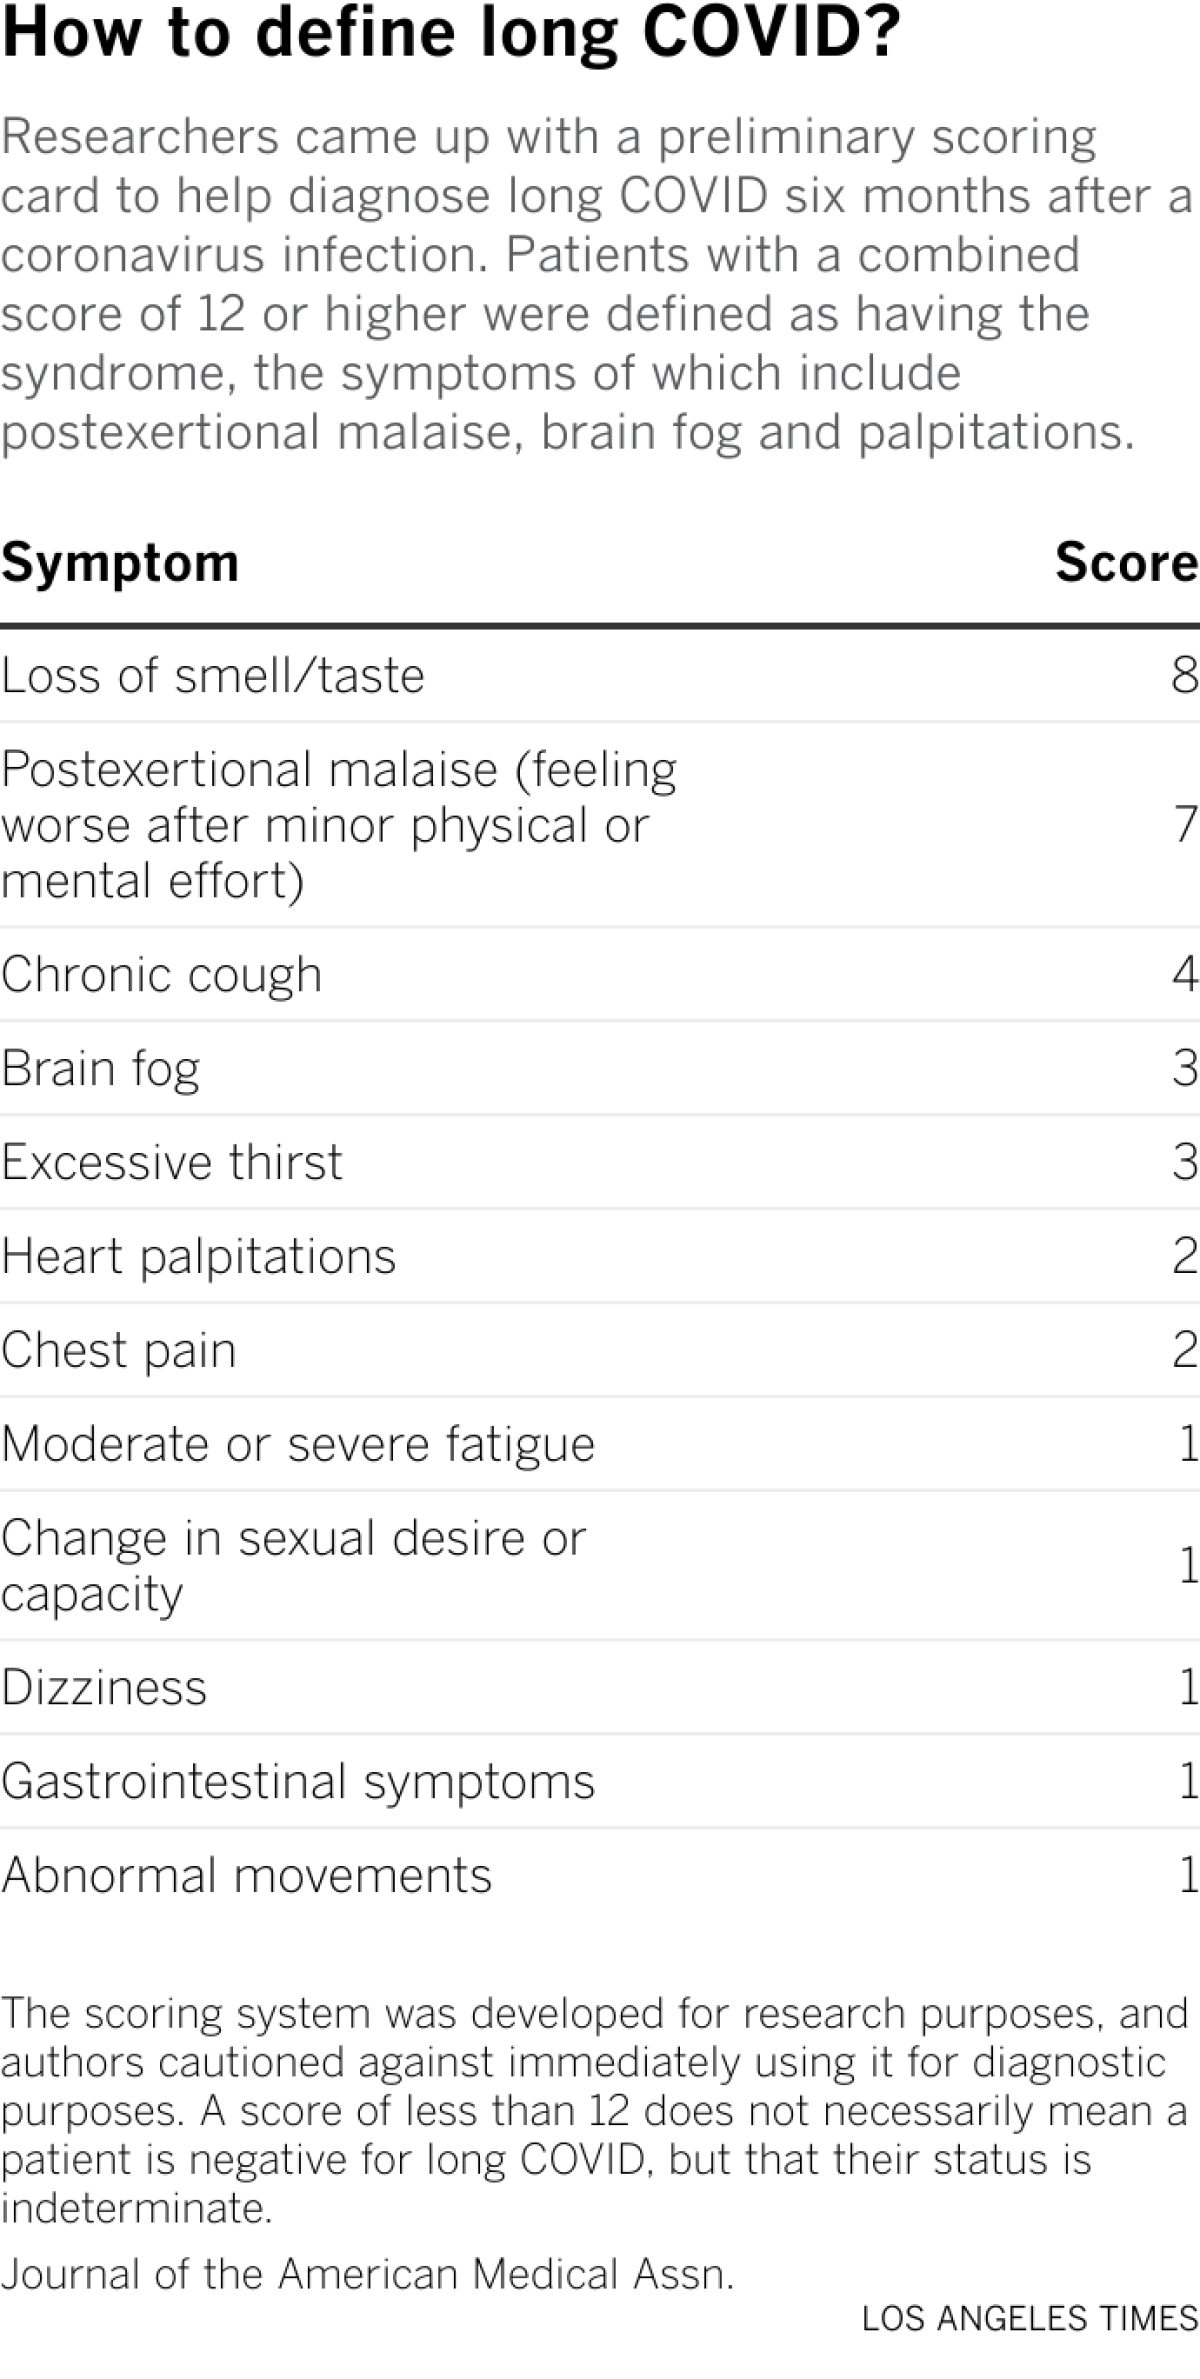 A table describing a preliminary scoring system to help diagnose long COVID. Loss of smell/taste has the highest score of 8, followed by postexertional malaise at 7, chronic cough at 4, brain fog at 3, excessive thirst at 3, heart palpitations at 2, chest pain at 2, moderate or severe fatigue at 1, change in sexual desire or capacity at 1, dizziness at 1, gastrointestinal symptoms at 1, and abnormal movements at 1.